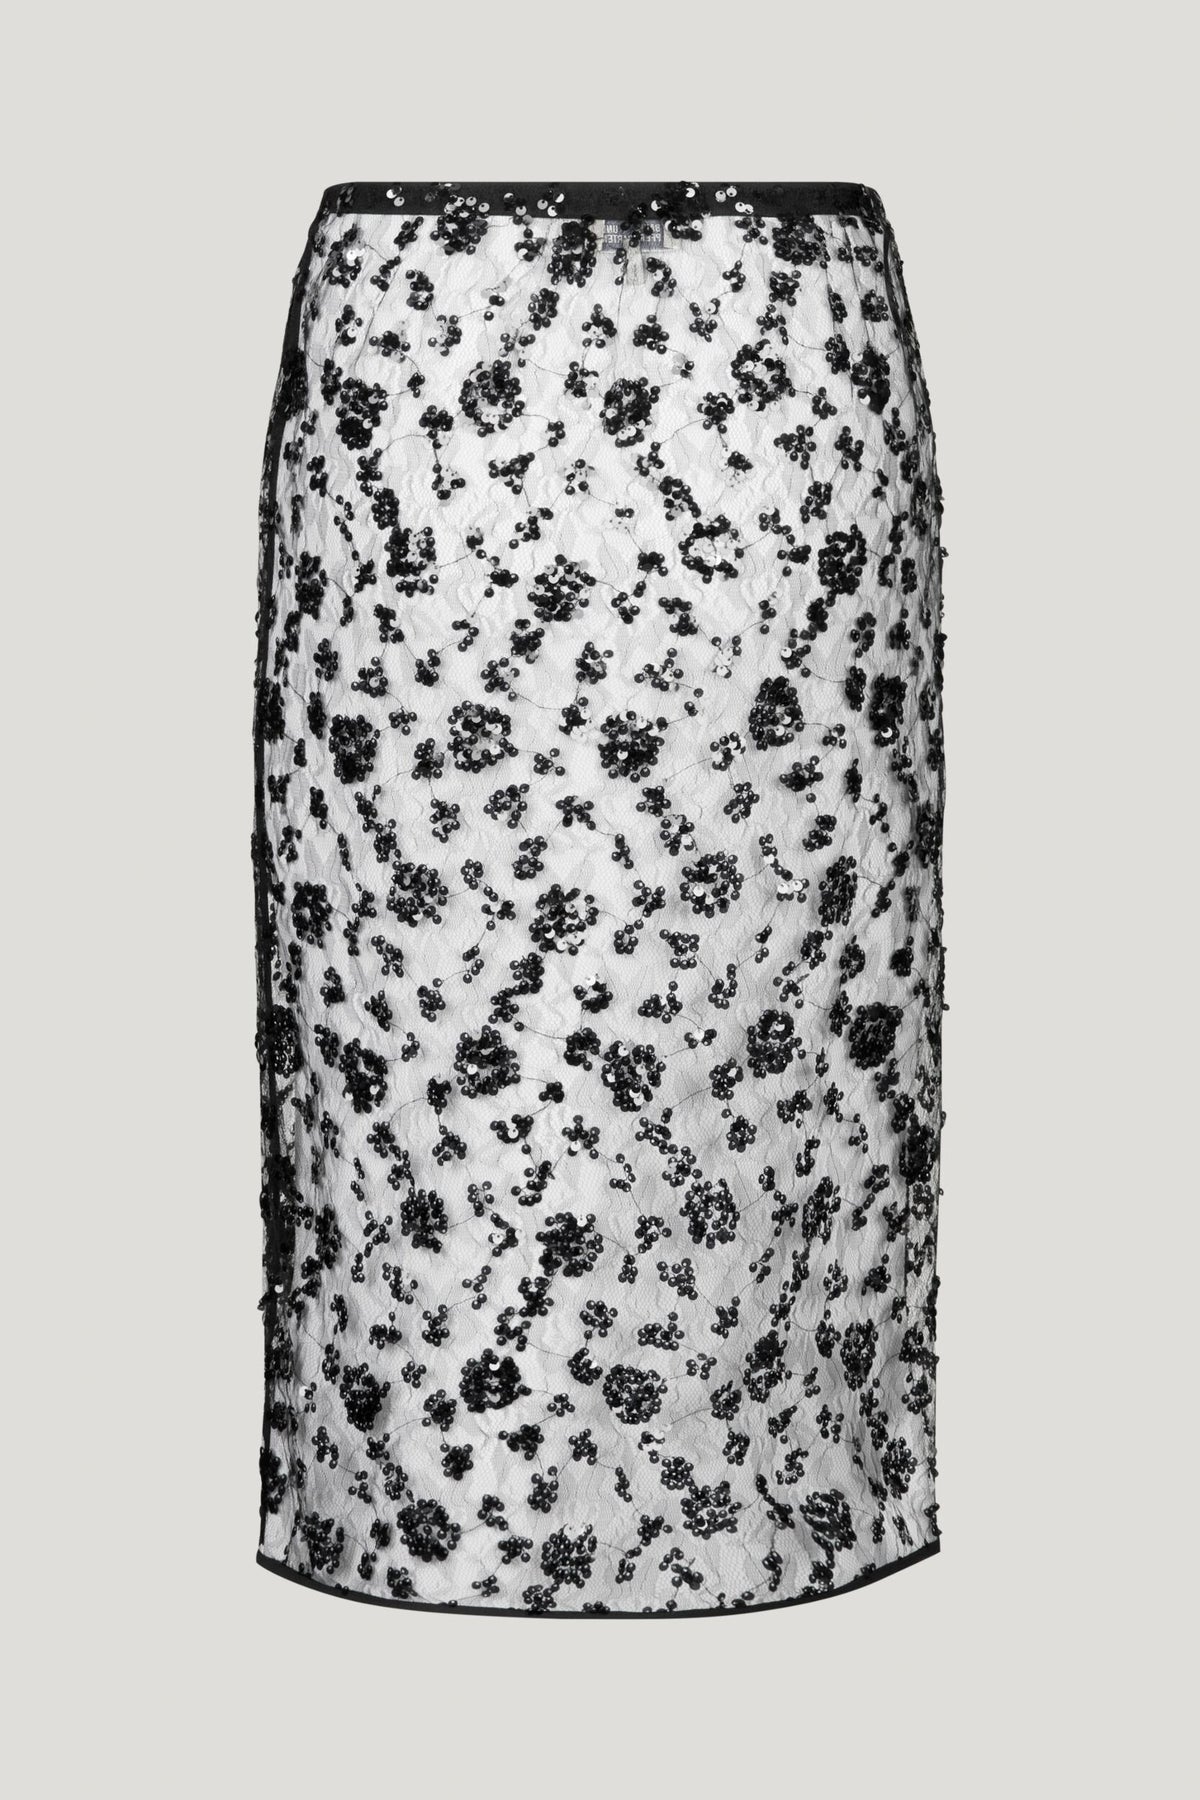 Midi black sheer pencil skirt with all over sequin embellishment